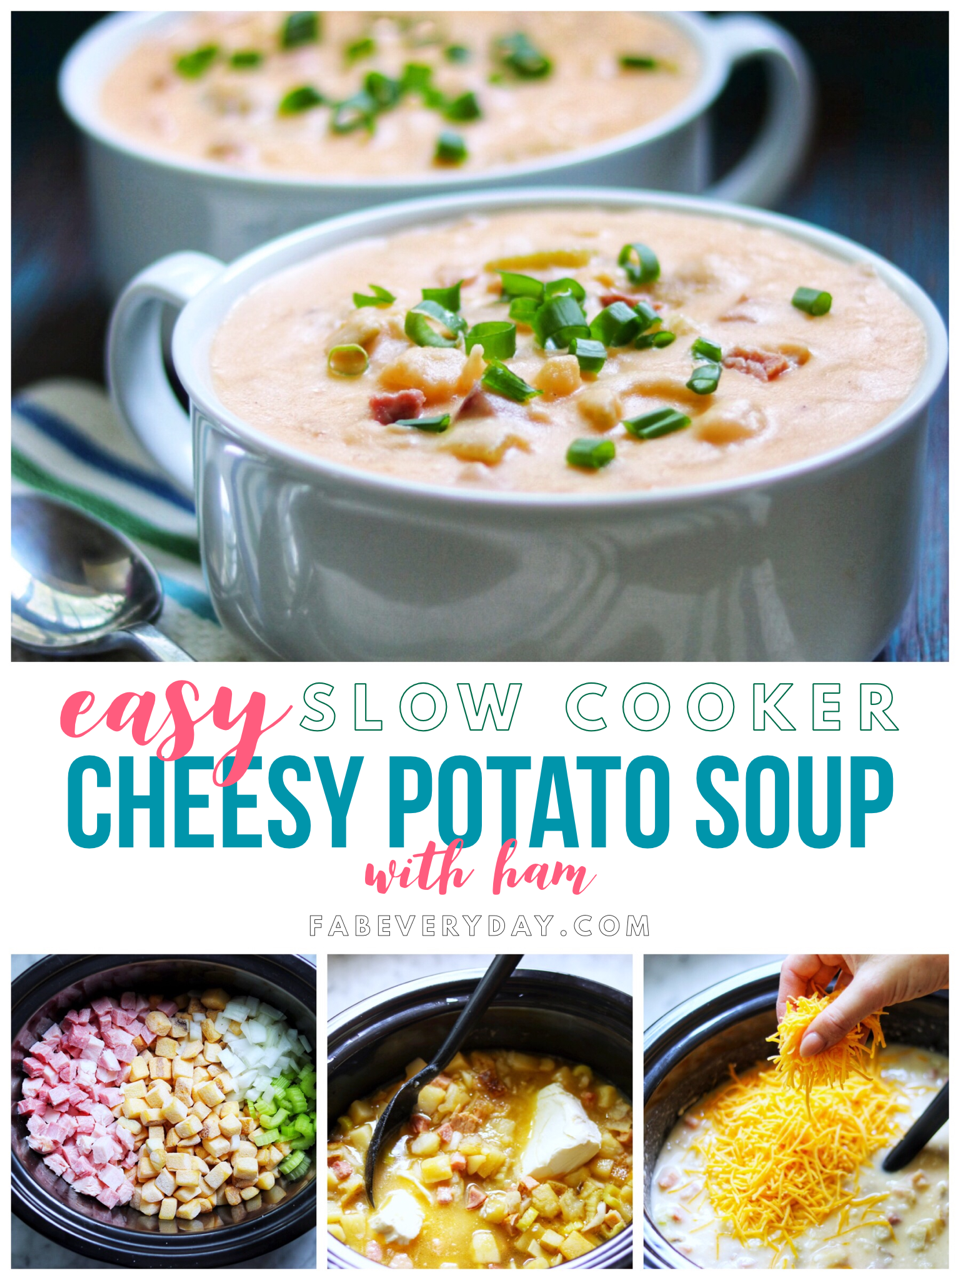 The BEST Slow Cooker Cheesy Potato and Ham Soup (great recipe for leftover ham!)